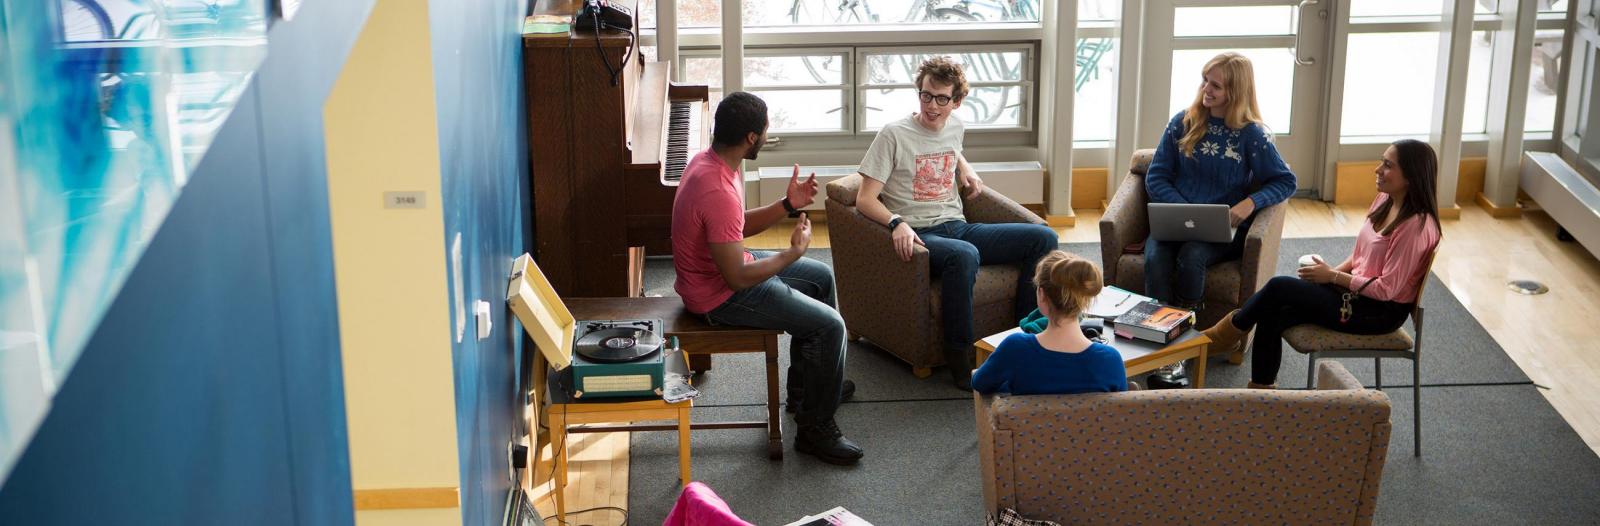 Students sit in chairs in an East Campus dorm foyer